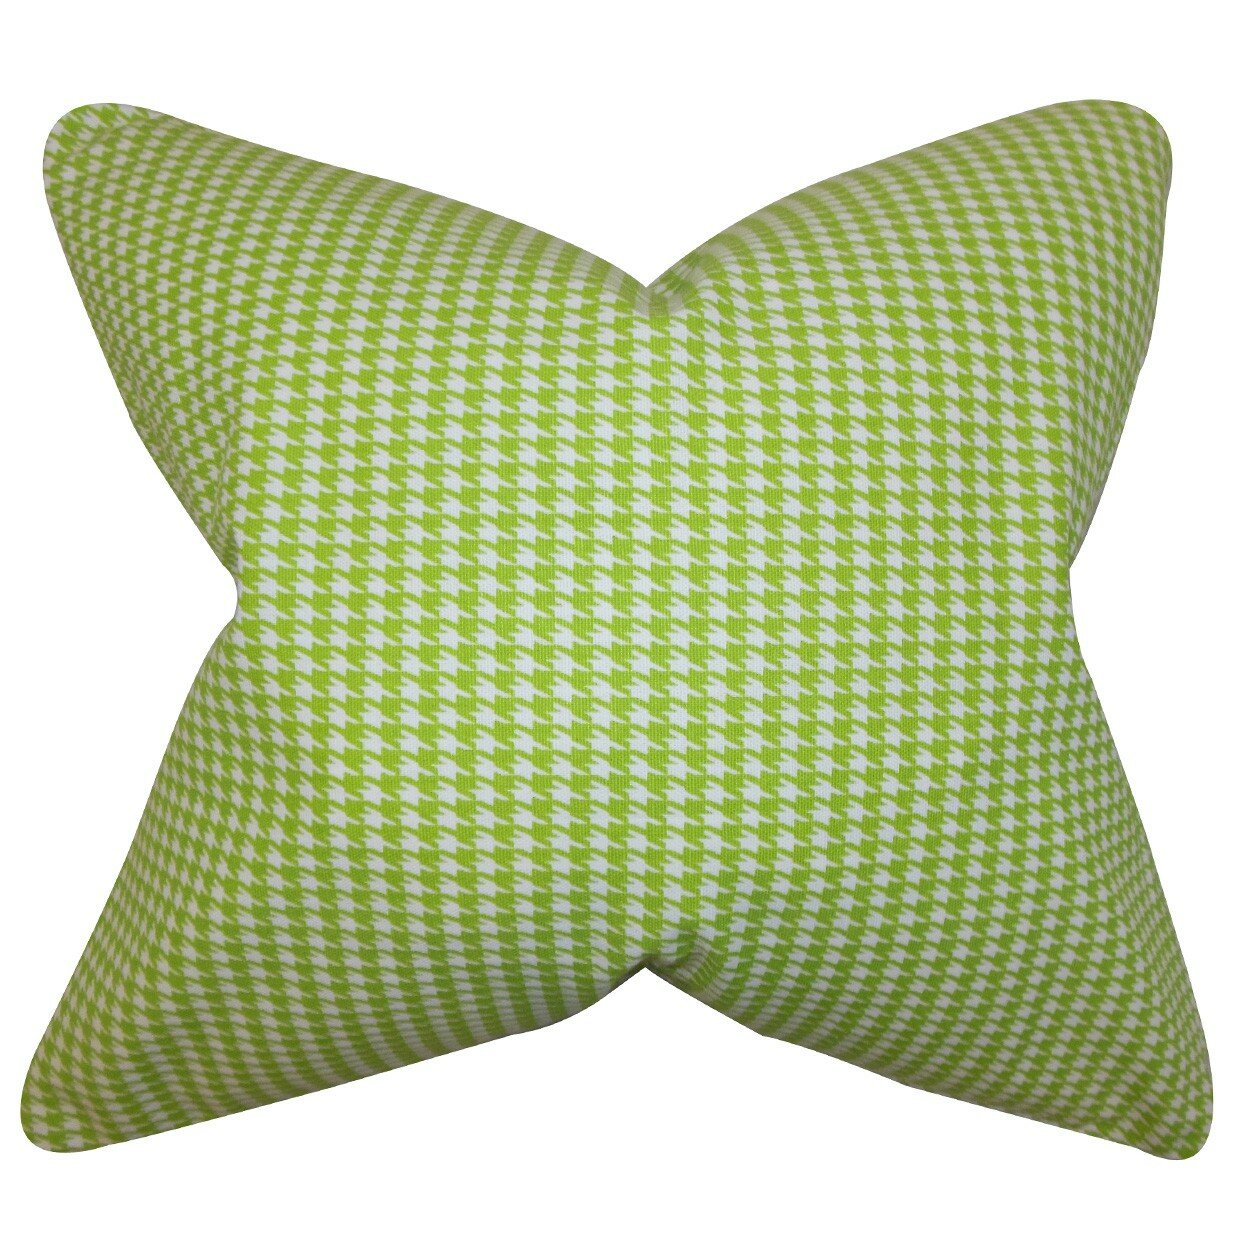 The Pillow Collection Lviv Houndstooth Bedding Sham Green King/20 x 36 